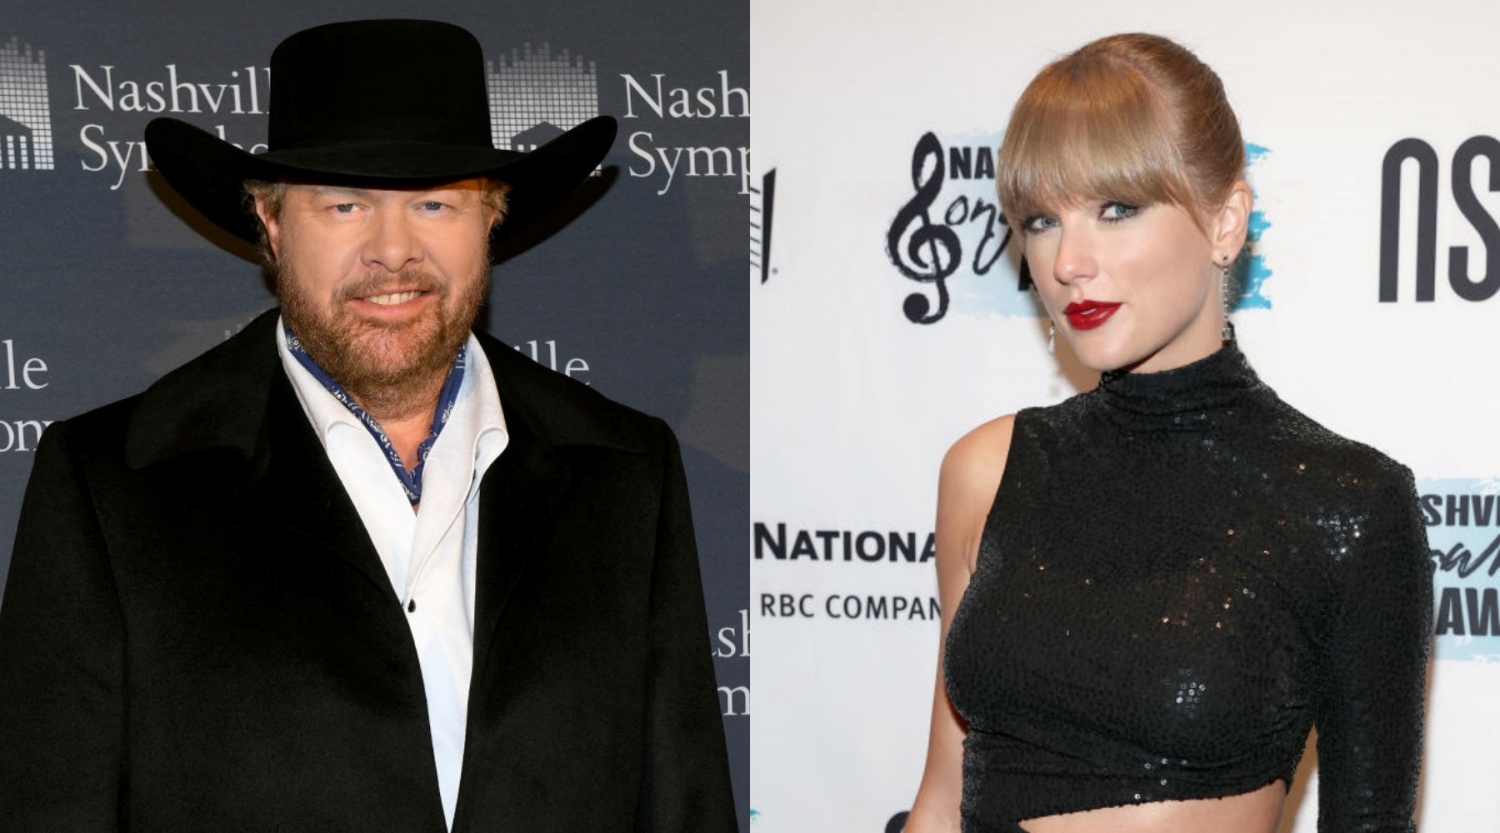 Toby Keith and Taylor Swift's Connection: How Late Country Singer Helped Launch 'Anti-Hero' Singer's Career Revealed